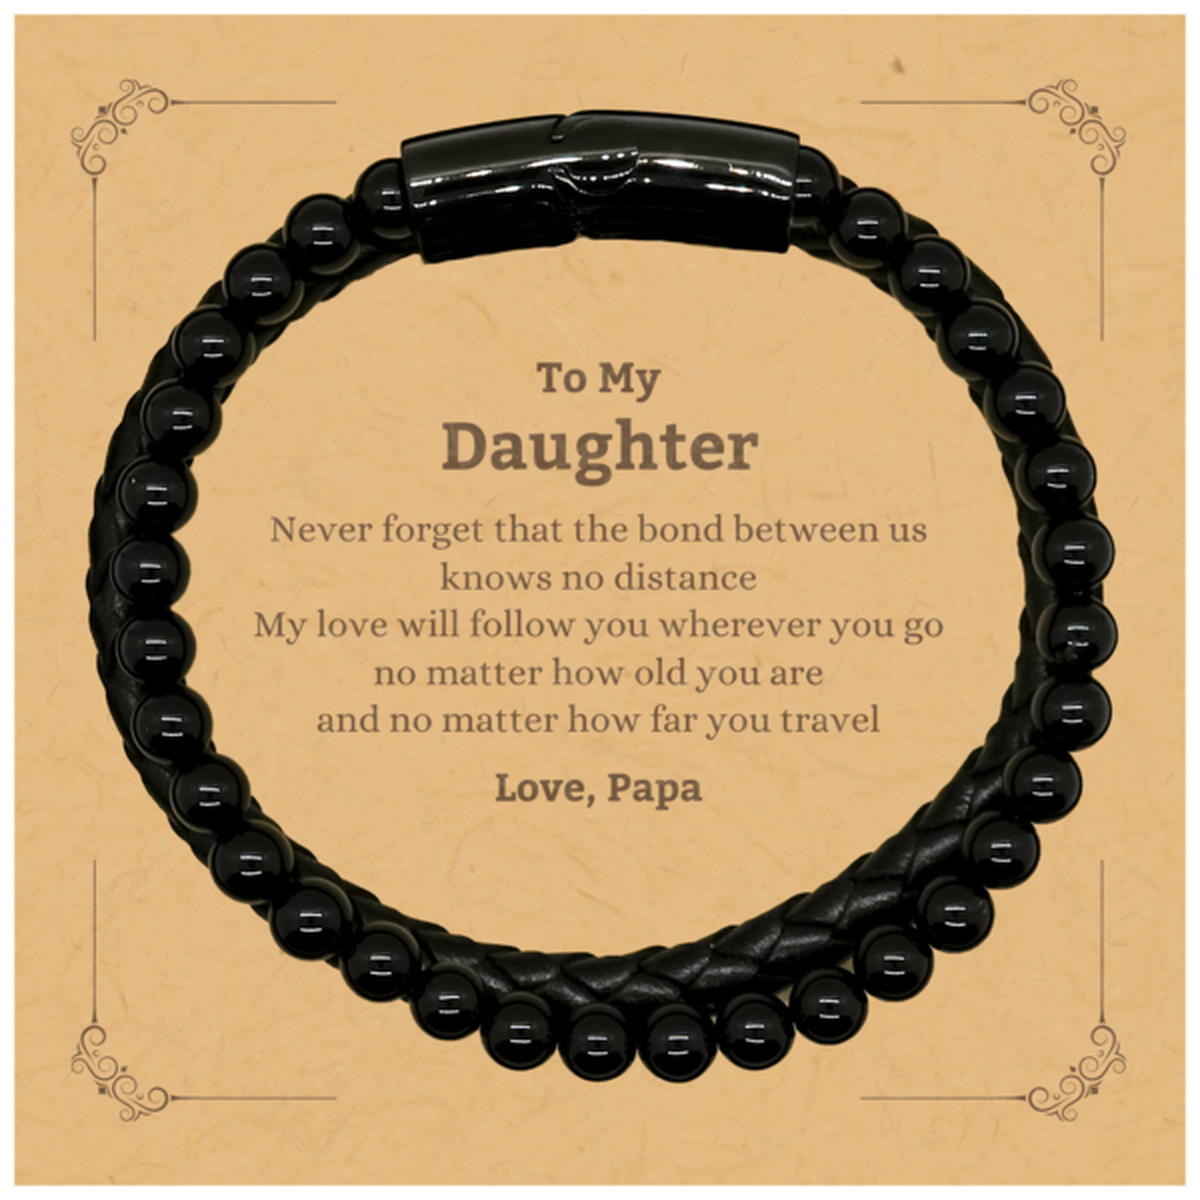 Daughter Birthday Gifts from Papa, Adjustable Stone Leather Bracelets for Daughter Christmas Graduation Unique Gifts Daughter Never forget that the bond between us knows no distance. Love, Papa